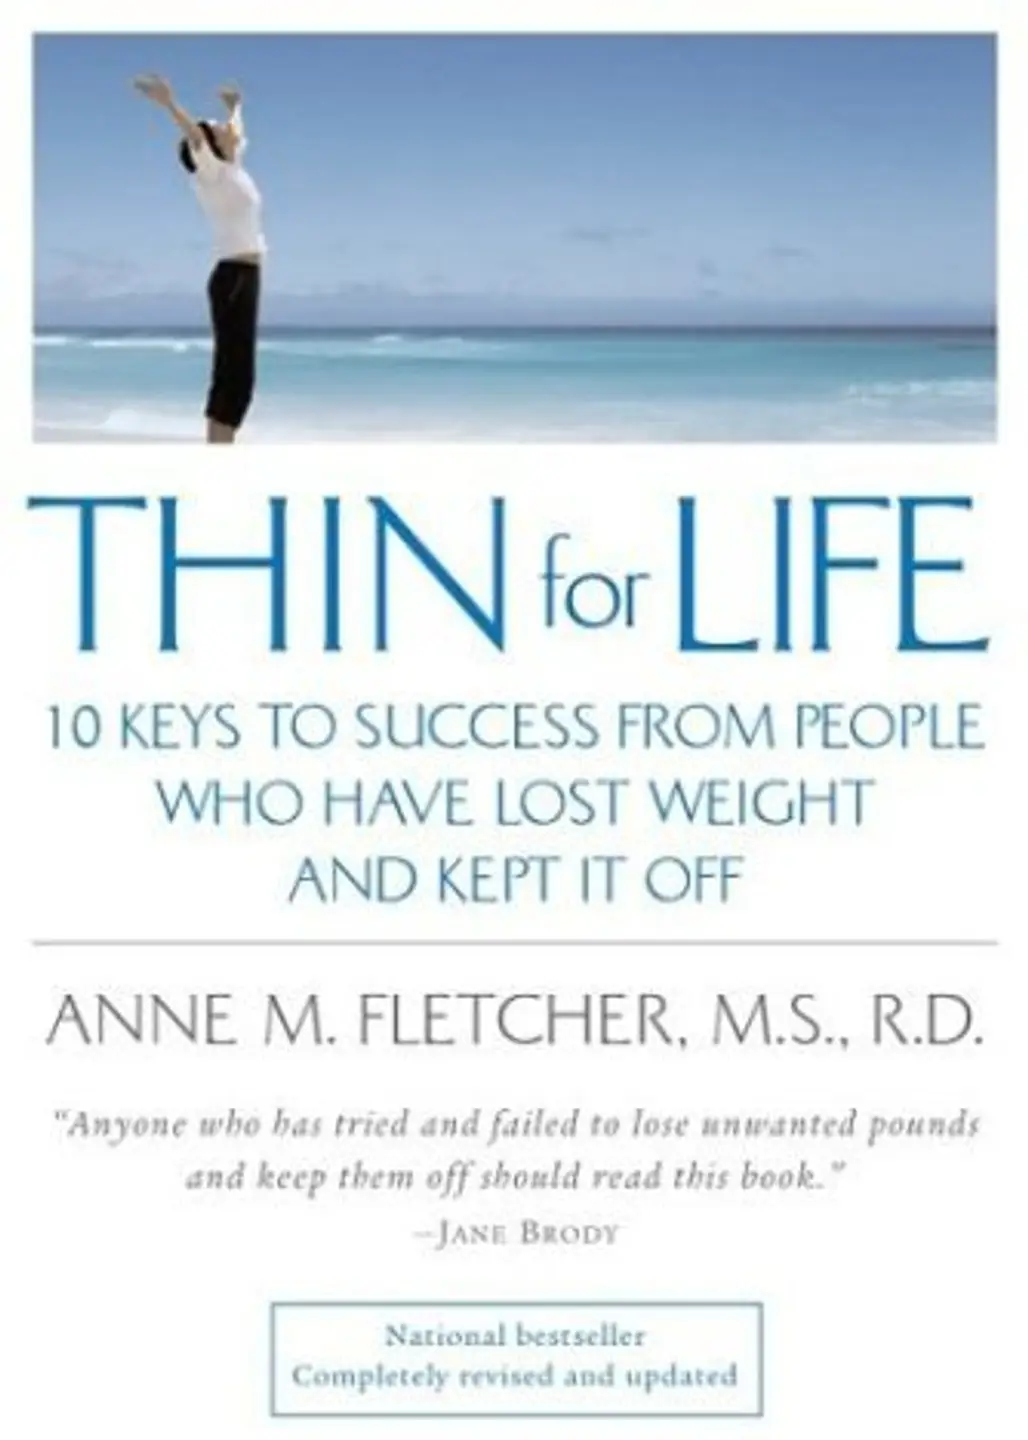 Thin for Life by Anne M. Fletcher